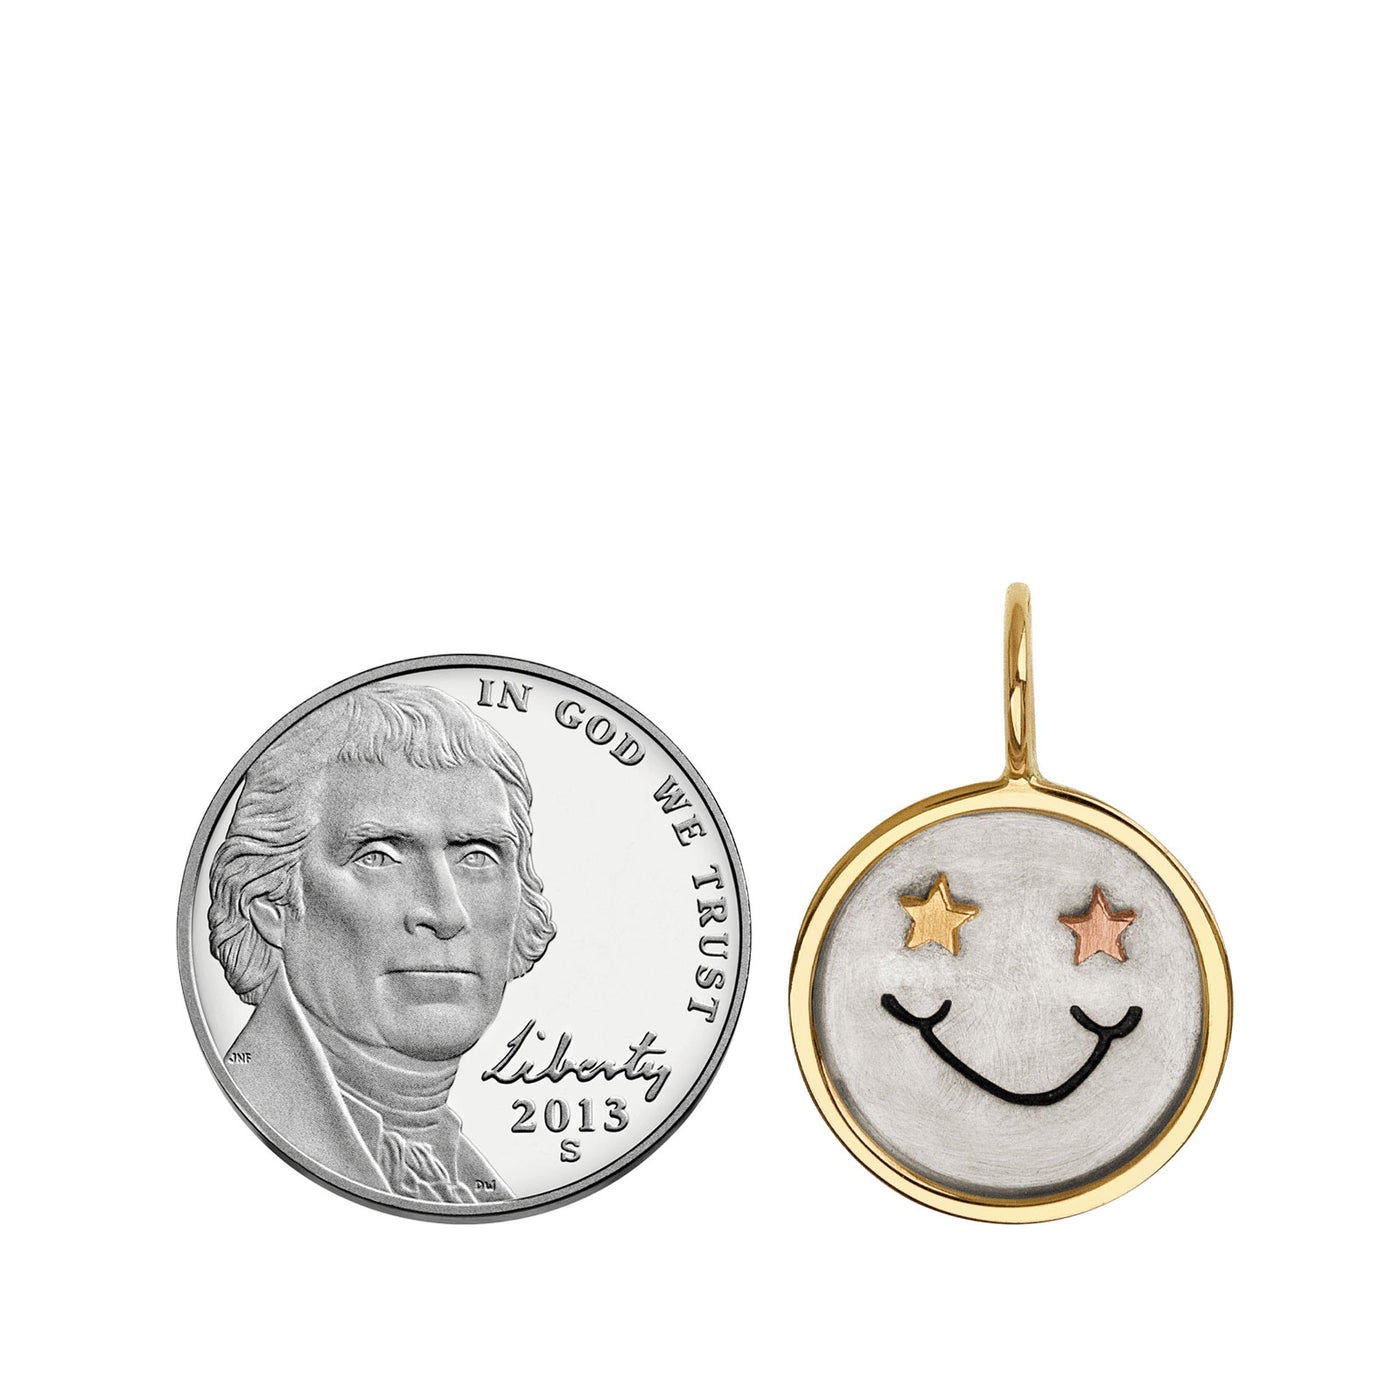 Smiley Face Round Charm